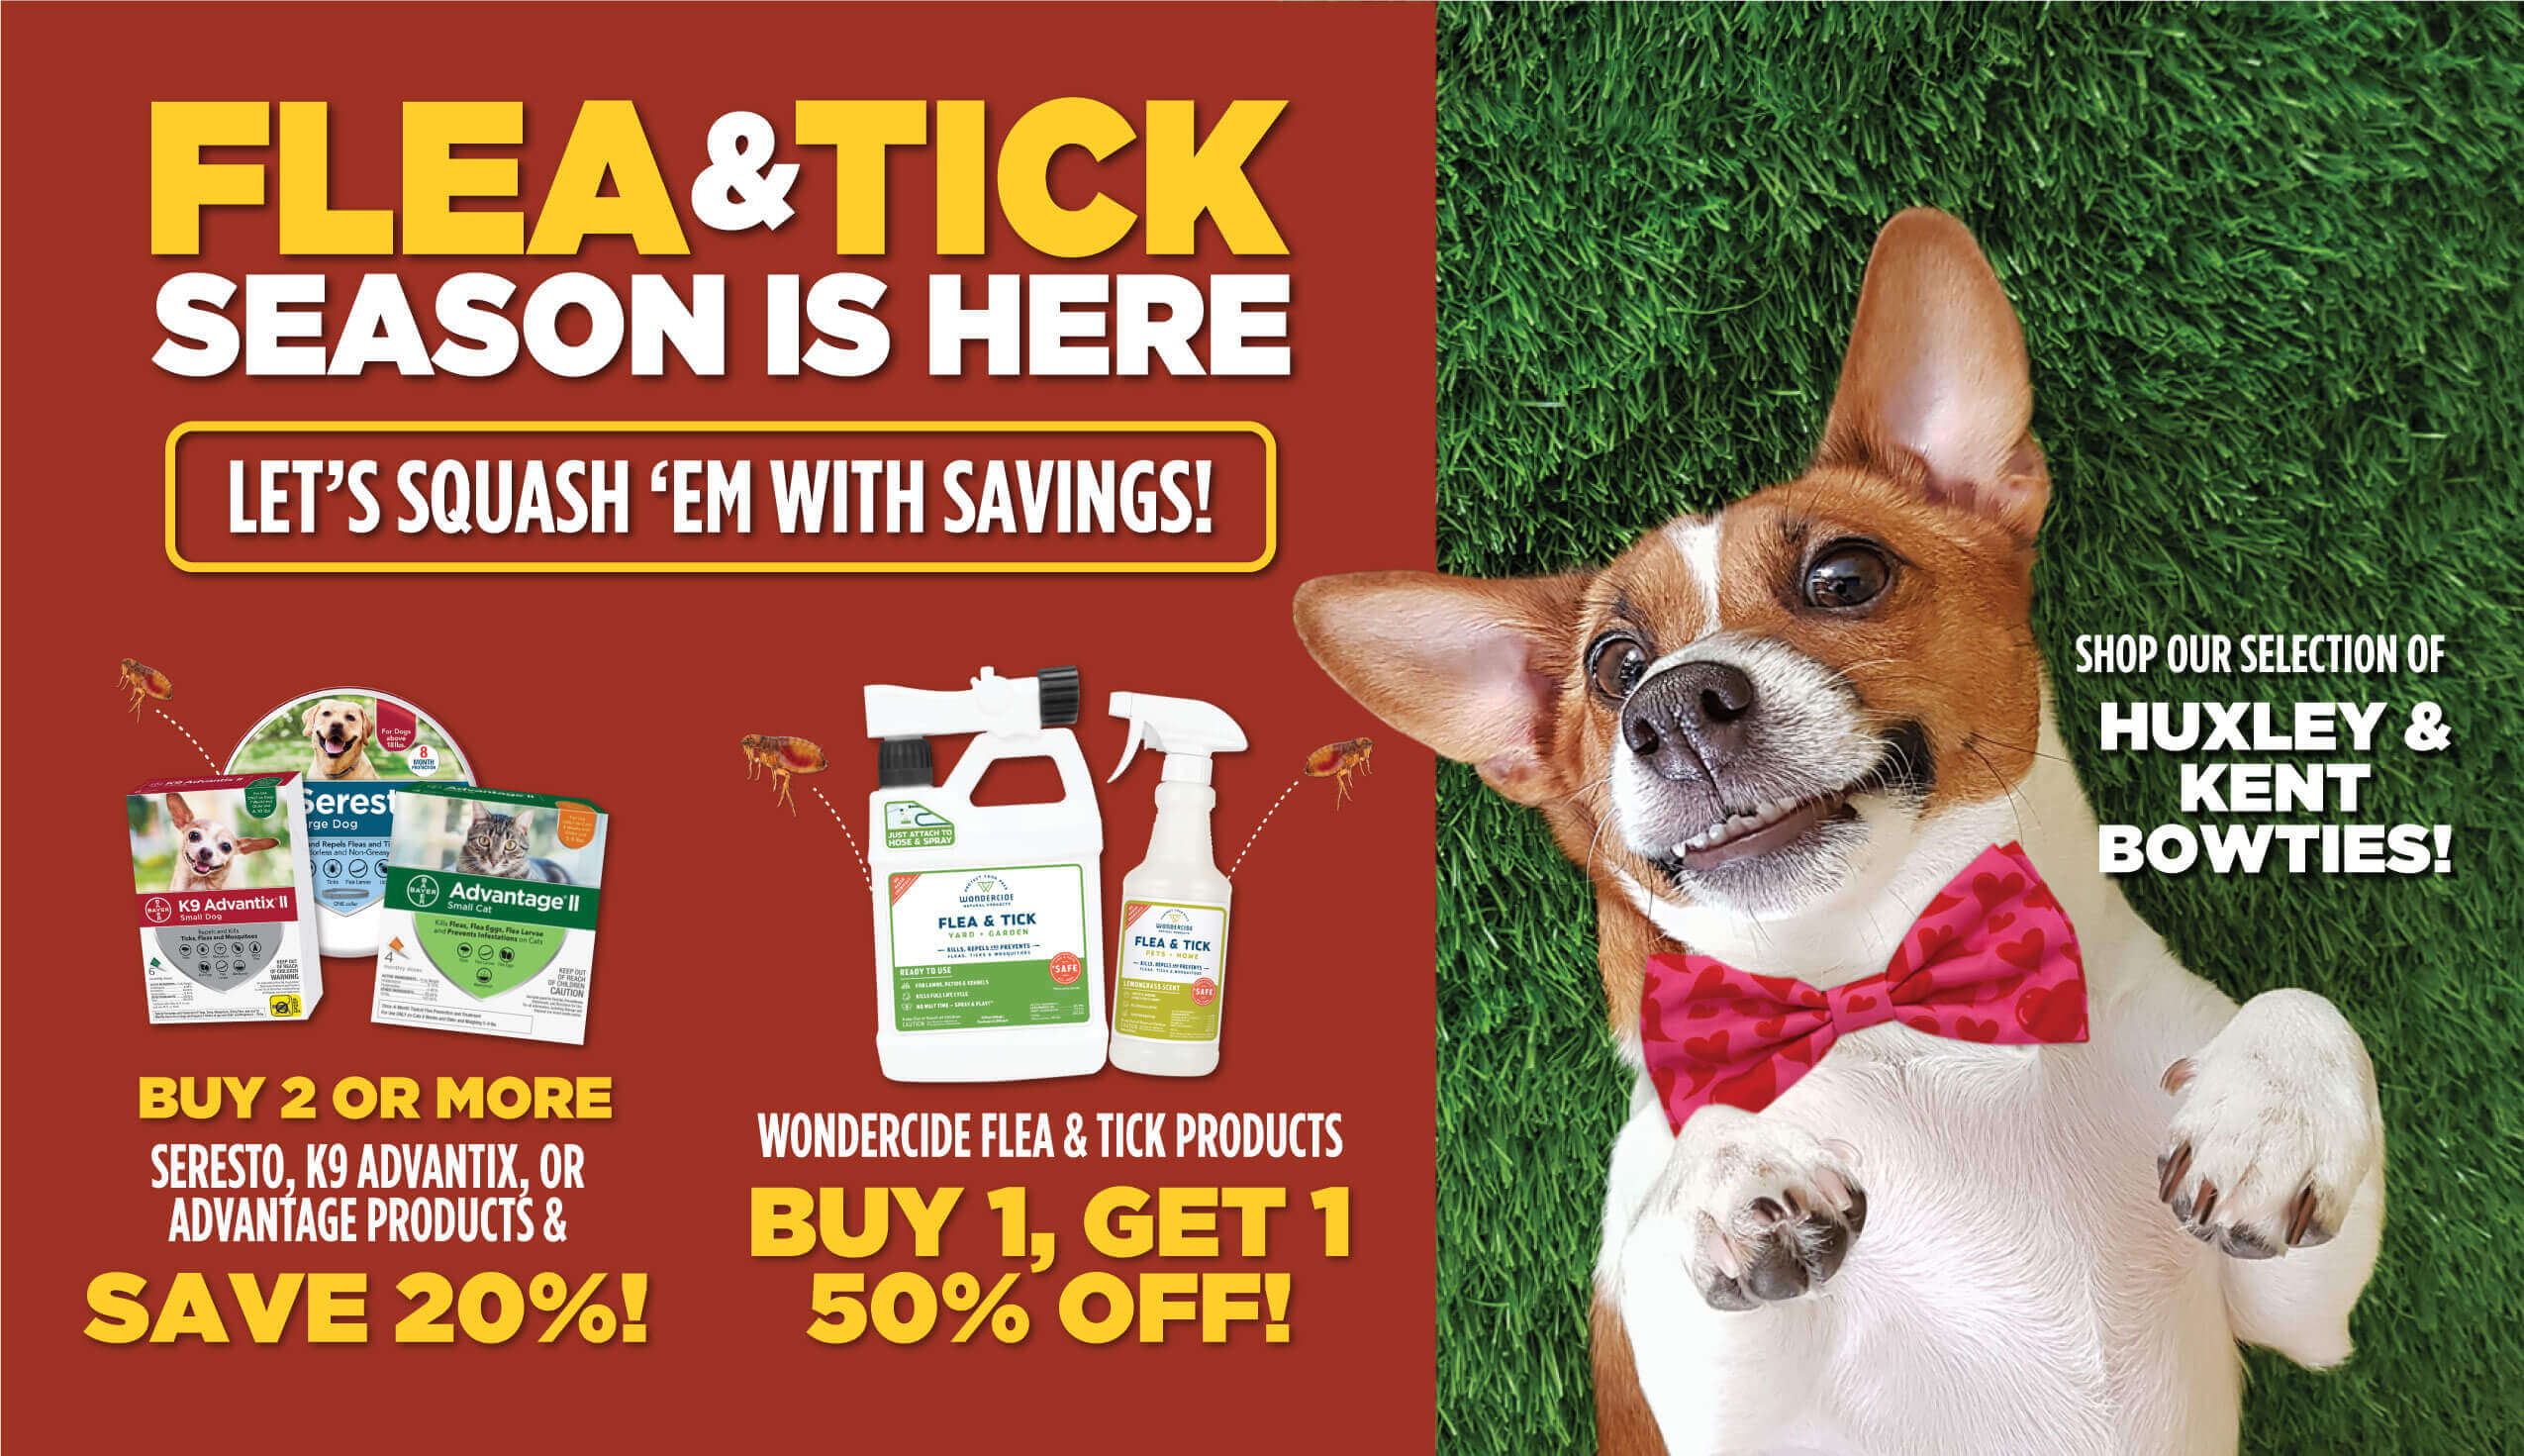 Flea and Tick Season is Here Let's Squash Them With Savings!